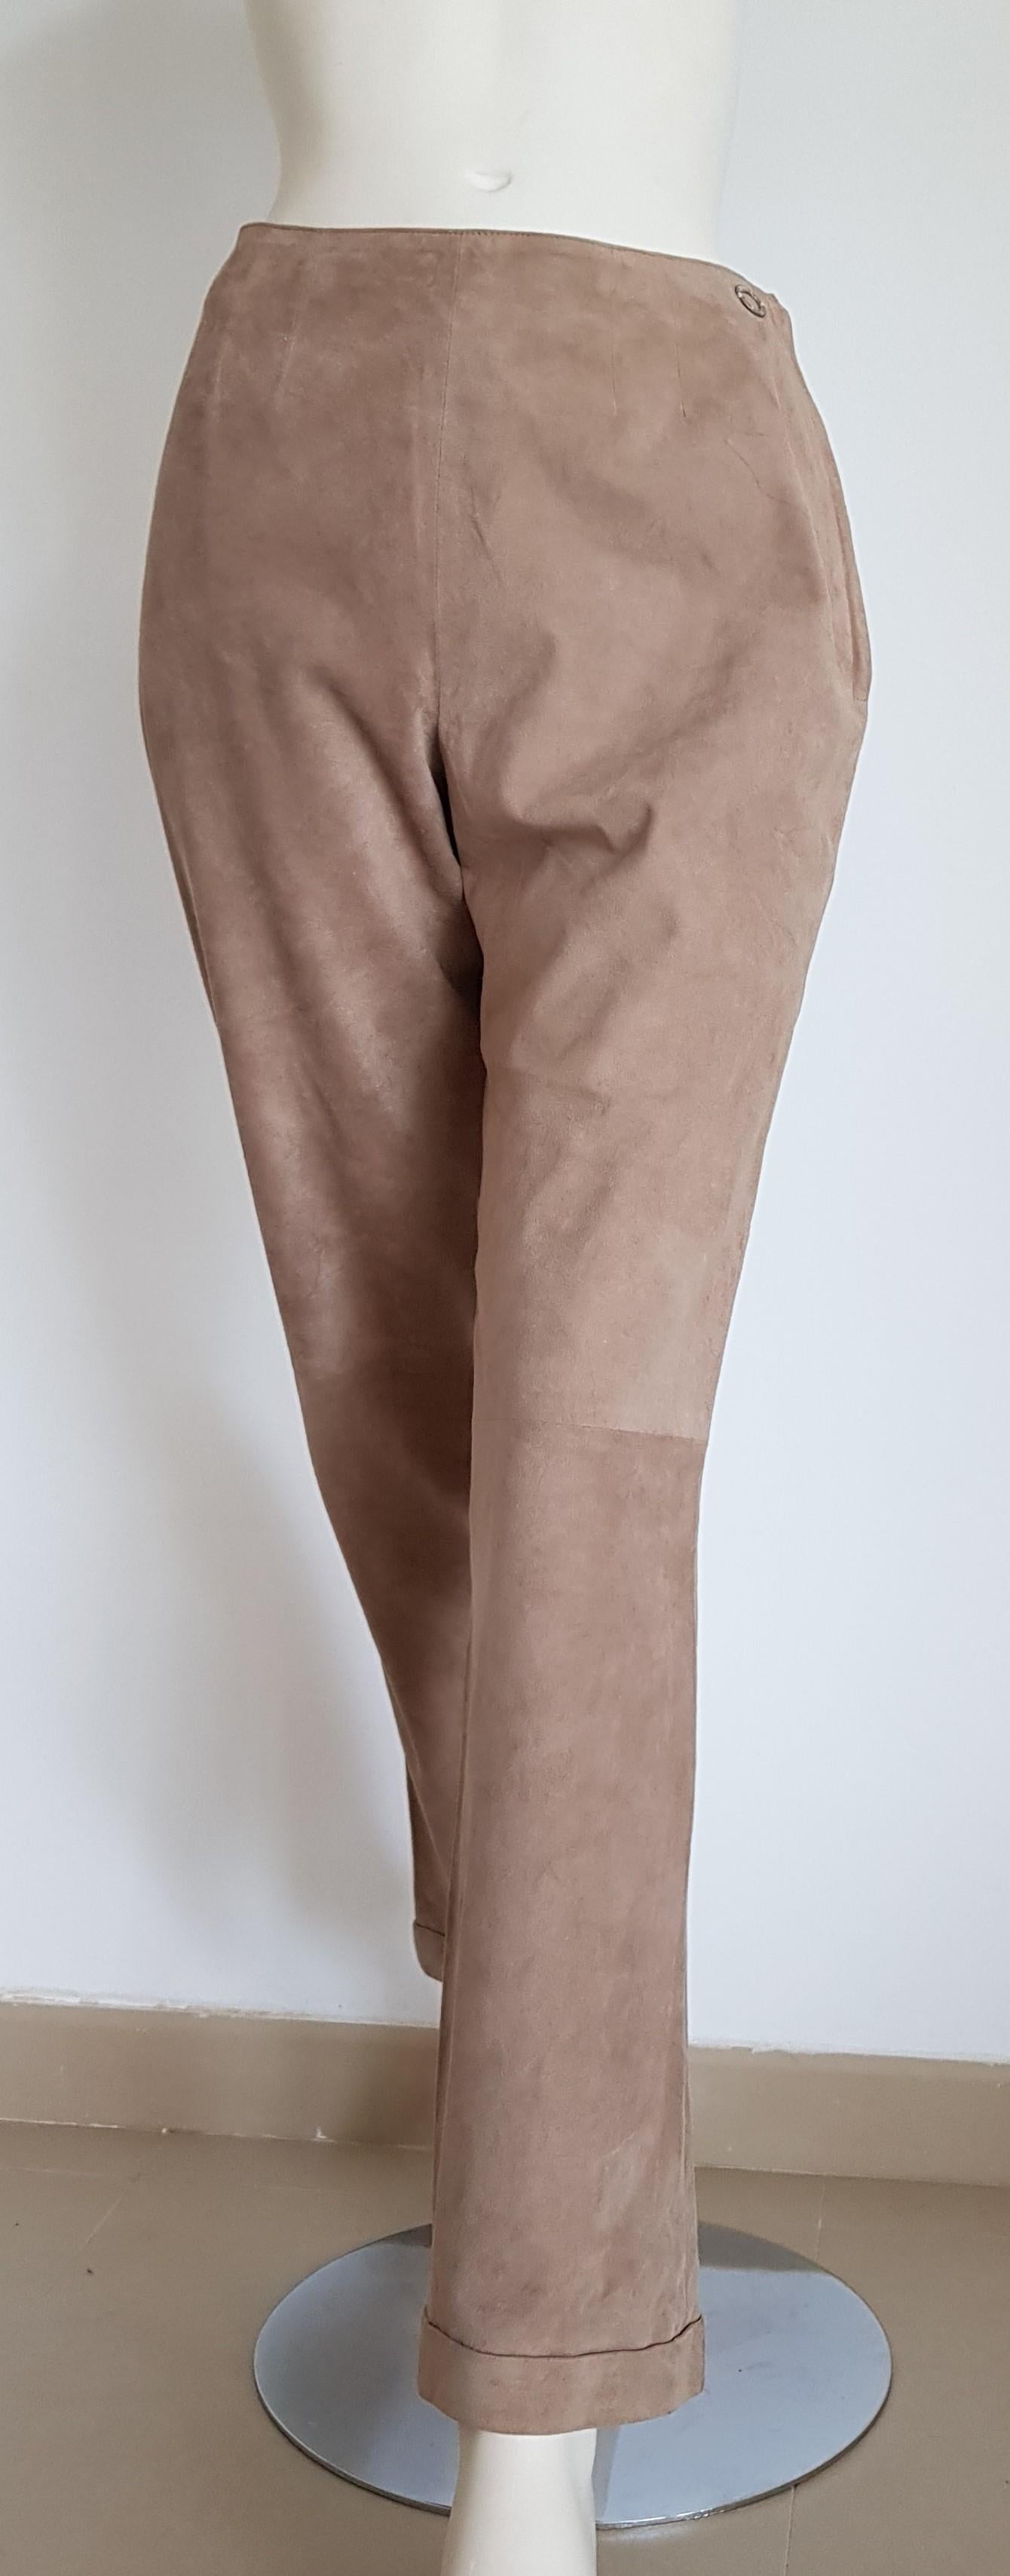 CHANEL beige suede pants silk lined - Unworn, New.

SIZE: equivalent to about Small / Medium, please review approx measurements as follows in cm. PANTS: lenght 99, inseam length 72, waist circumference 75, hip circumference 96, leg hem circumference